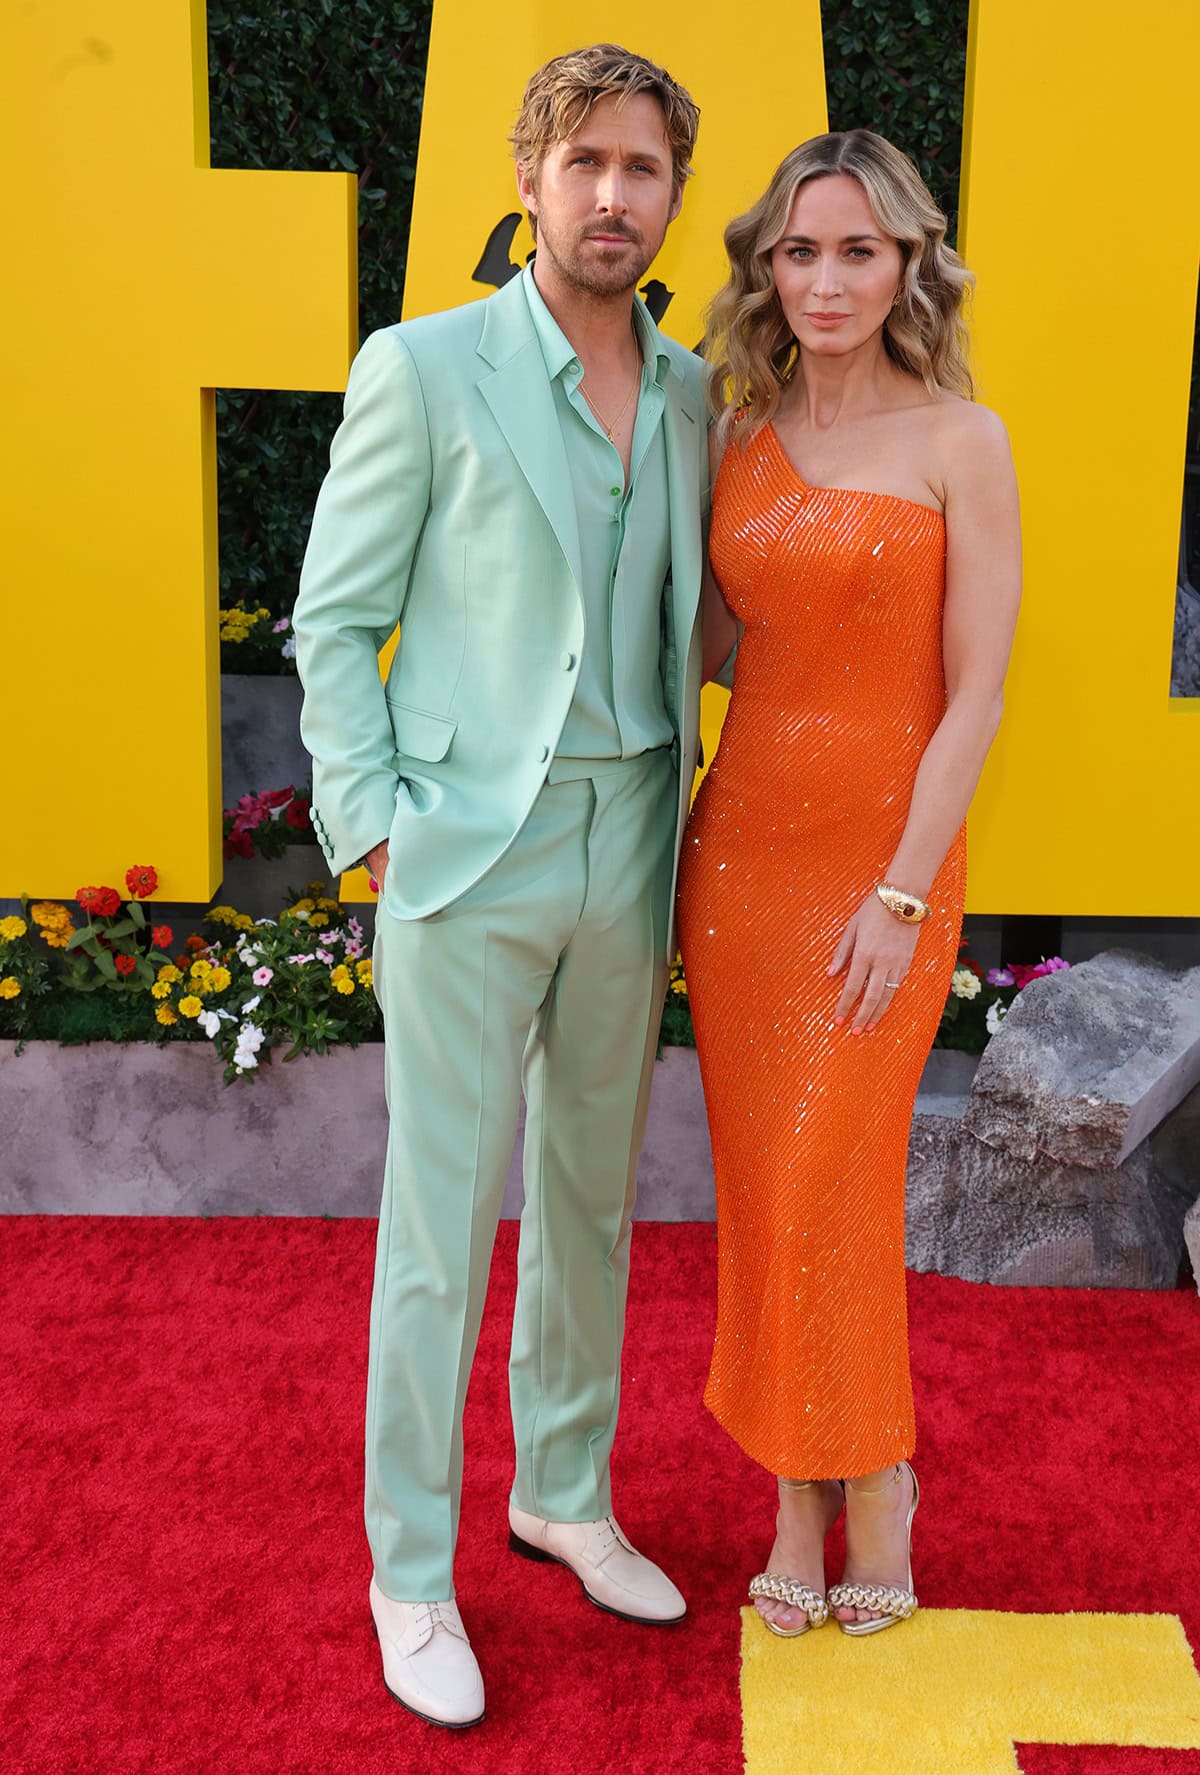 Ryan Gosling looks handsome in a custom mint green suit by Gucci with white loafers and a gold Tag Heuer watch